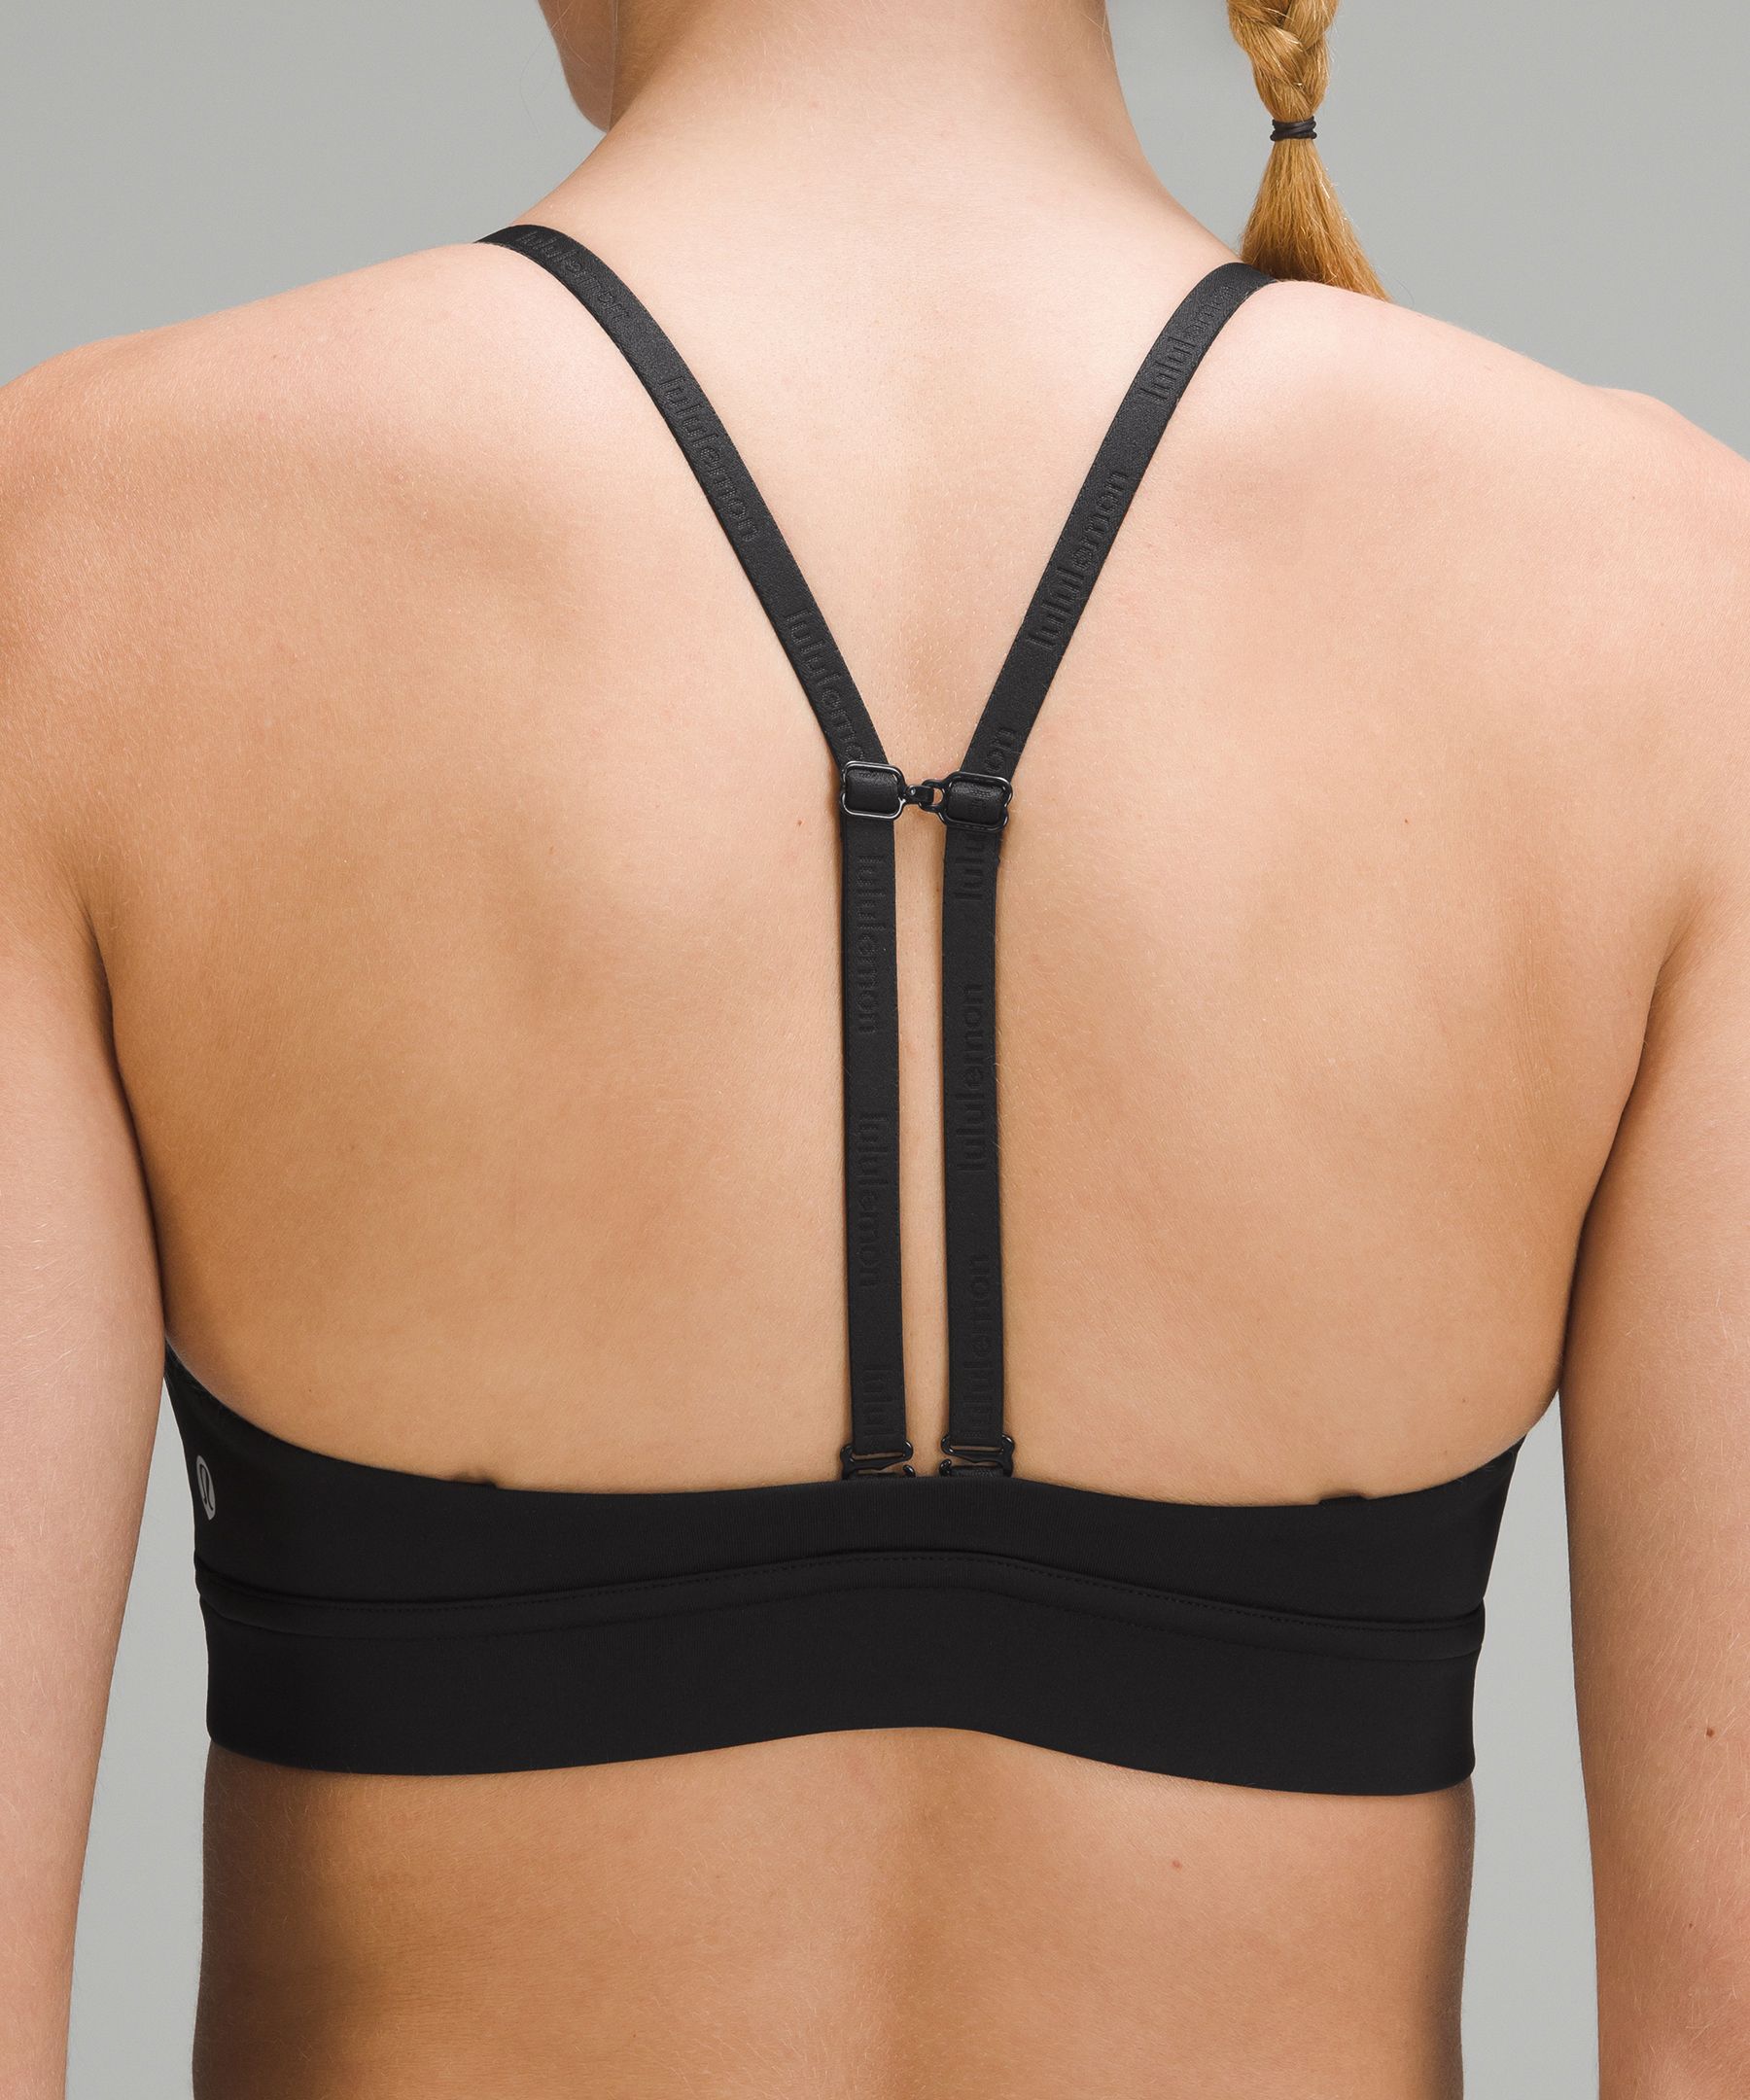 License to Train Triangle Bra *Light Support, A/B Cup | Women's Bras